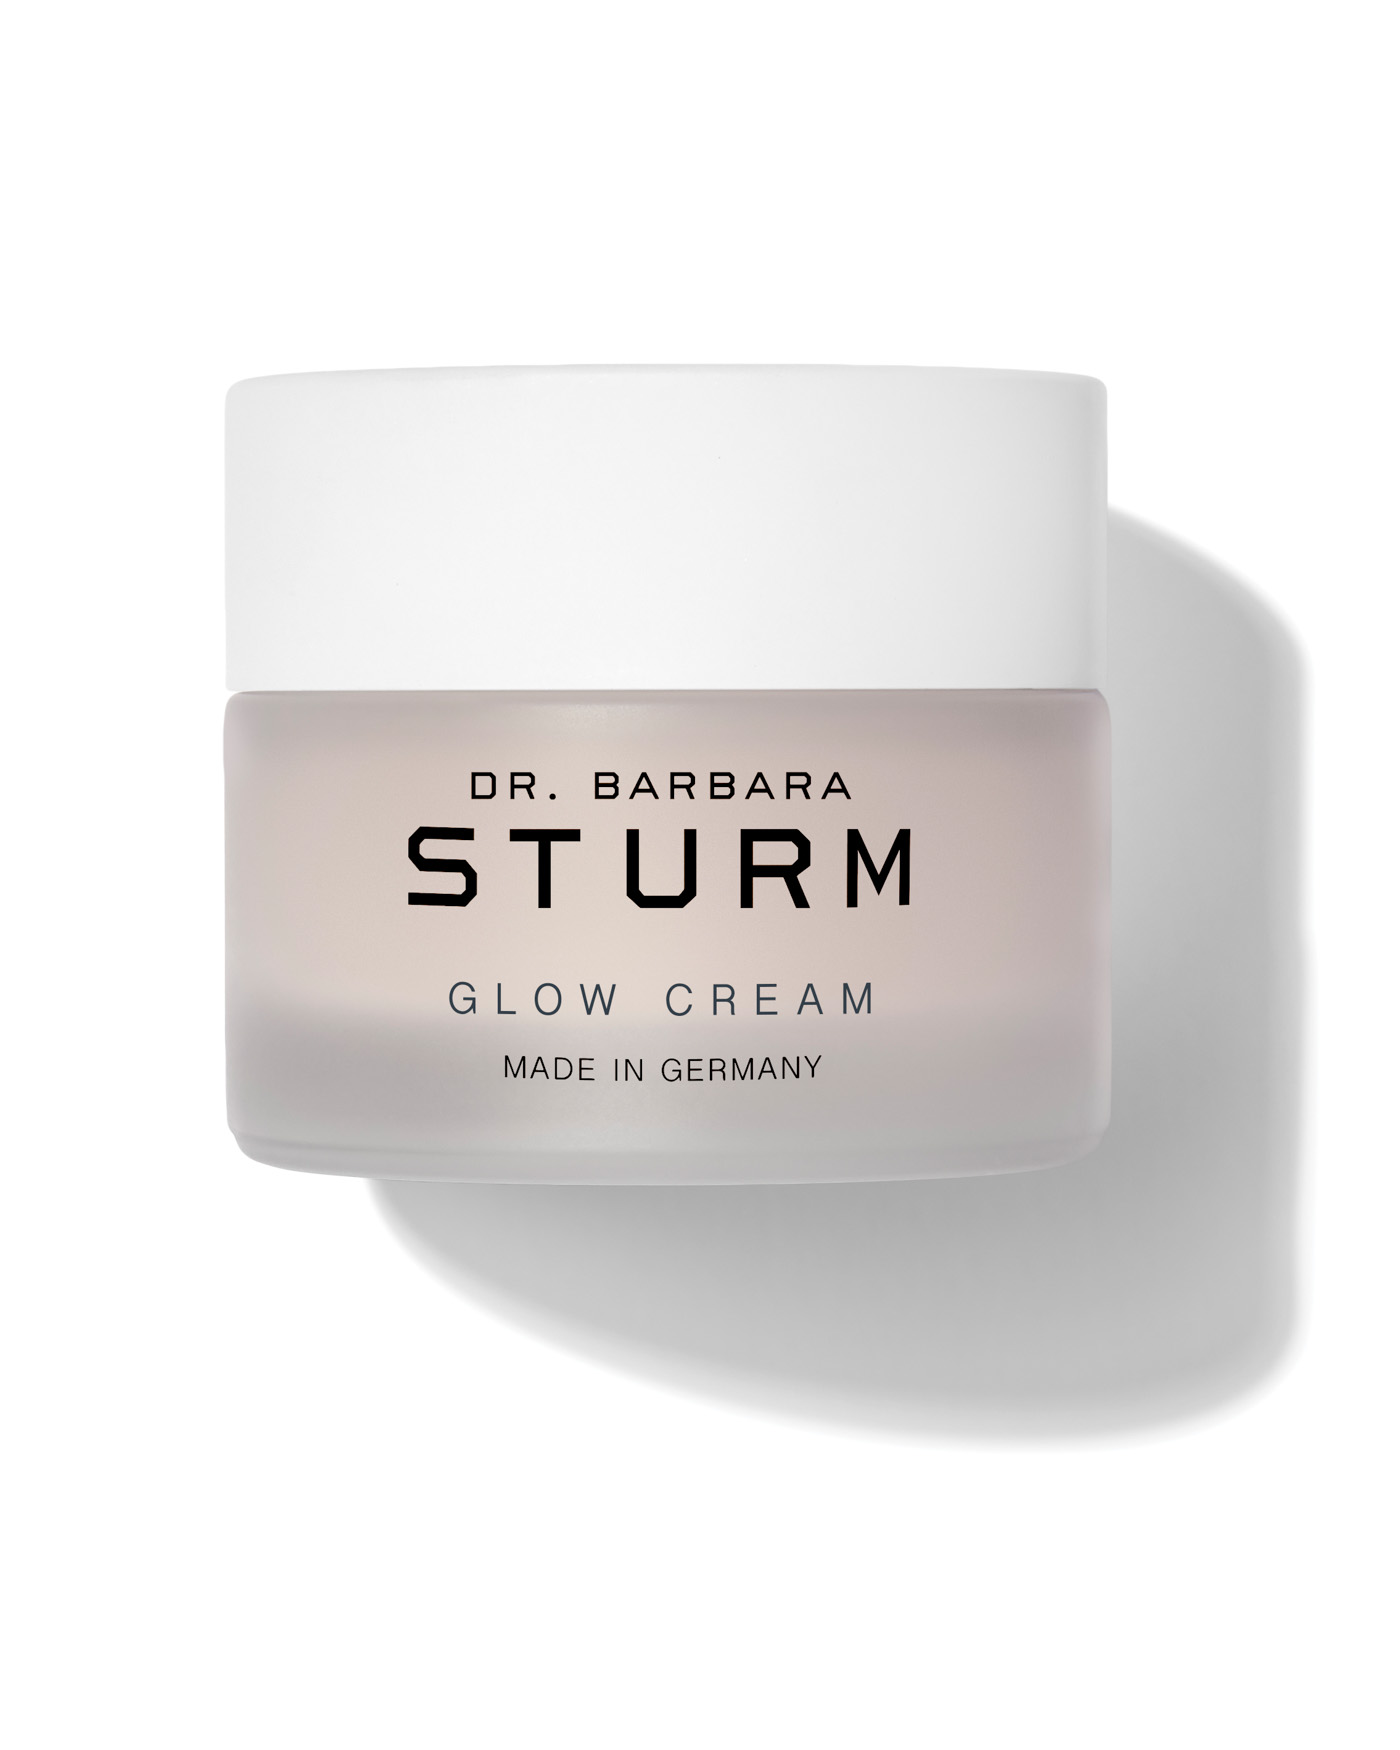 26 Newest Beauty Launch This Month From Dr. Barbara Sturm, Glow Cream, Drsturm.com